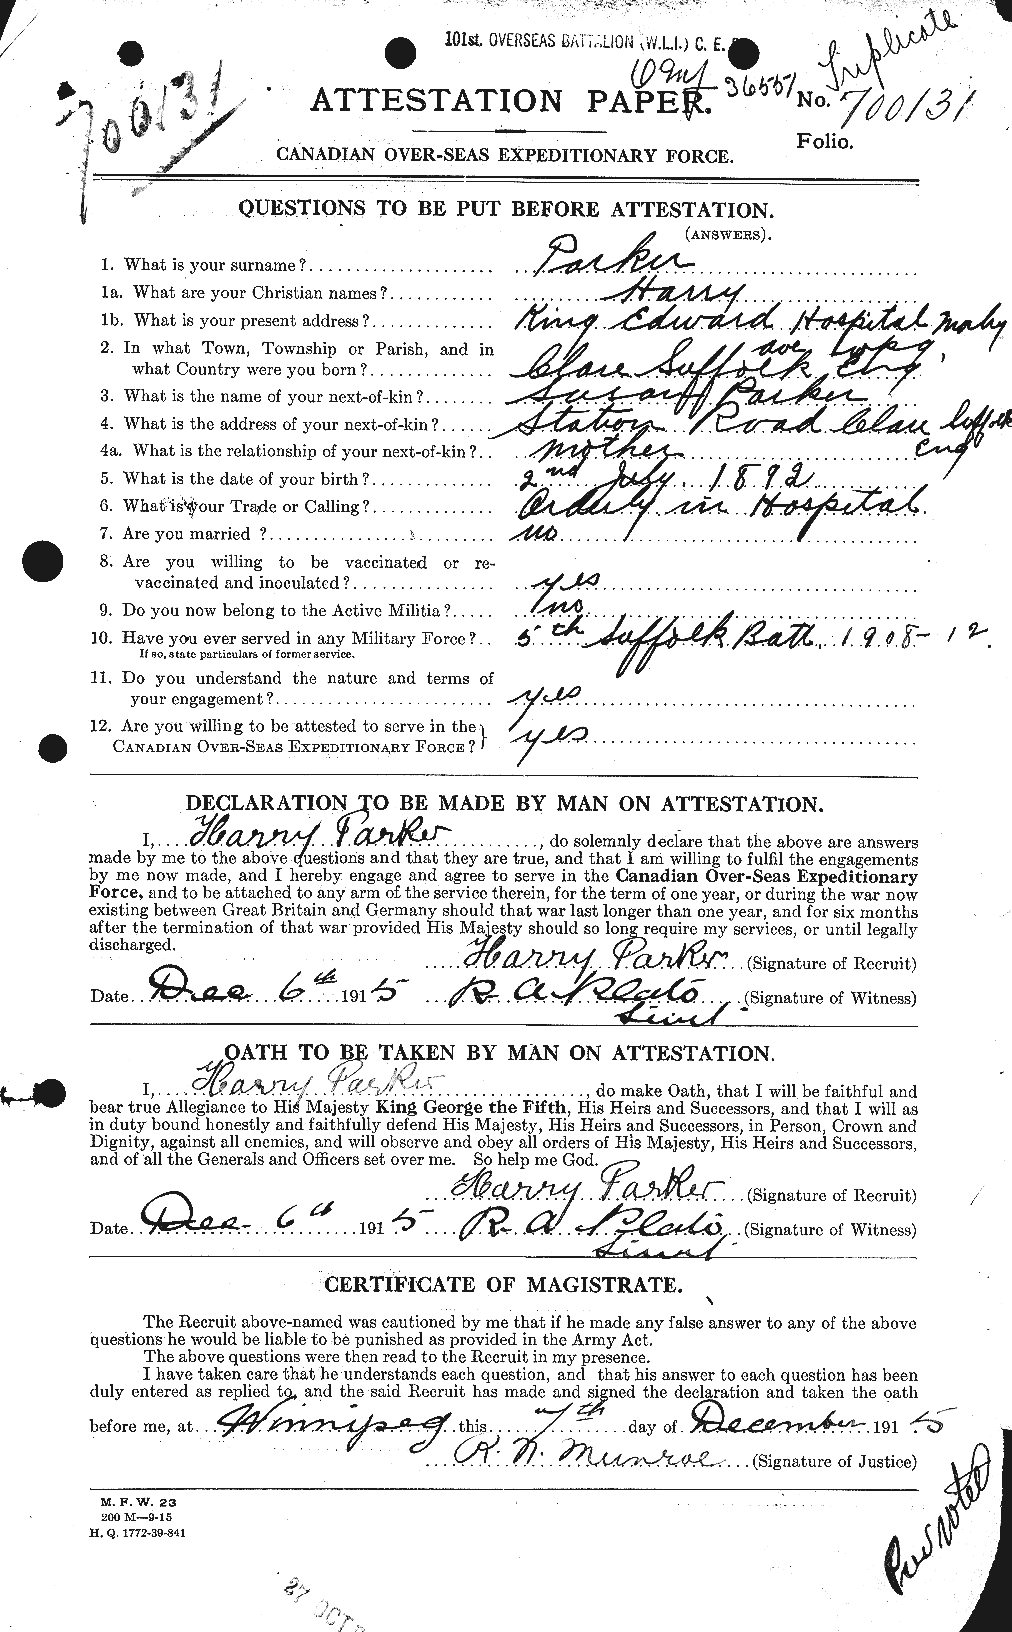 Personnel Records of the First World War - CEF 565326a